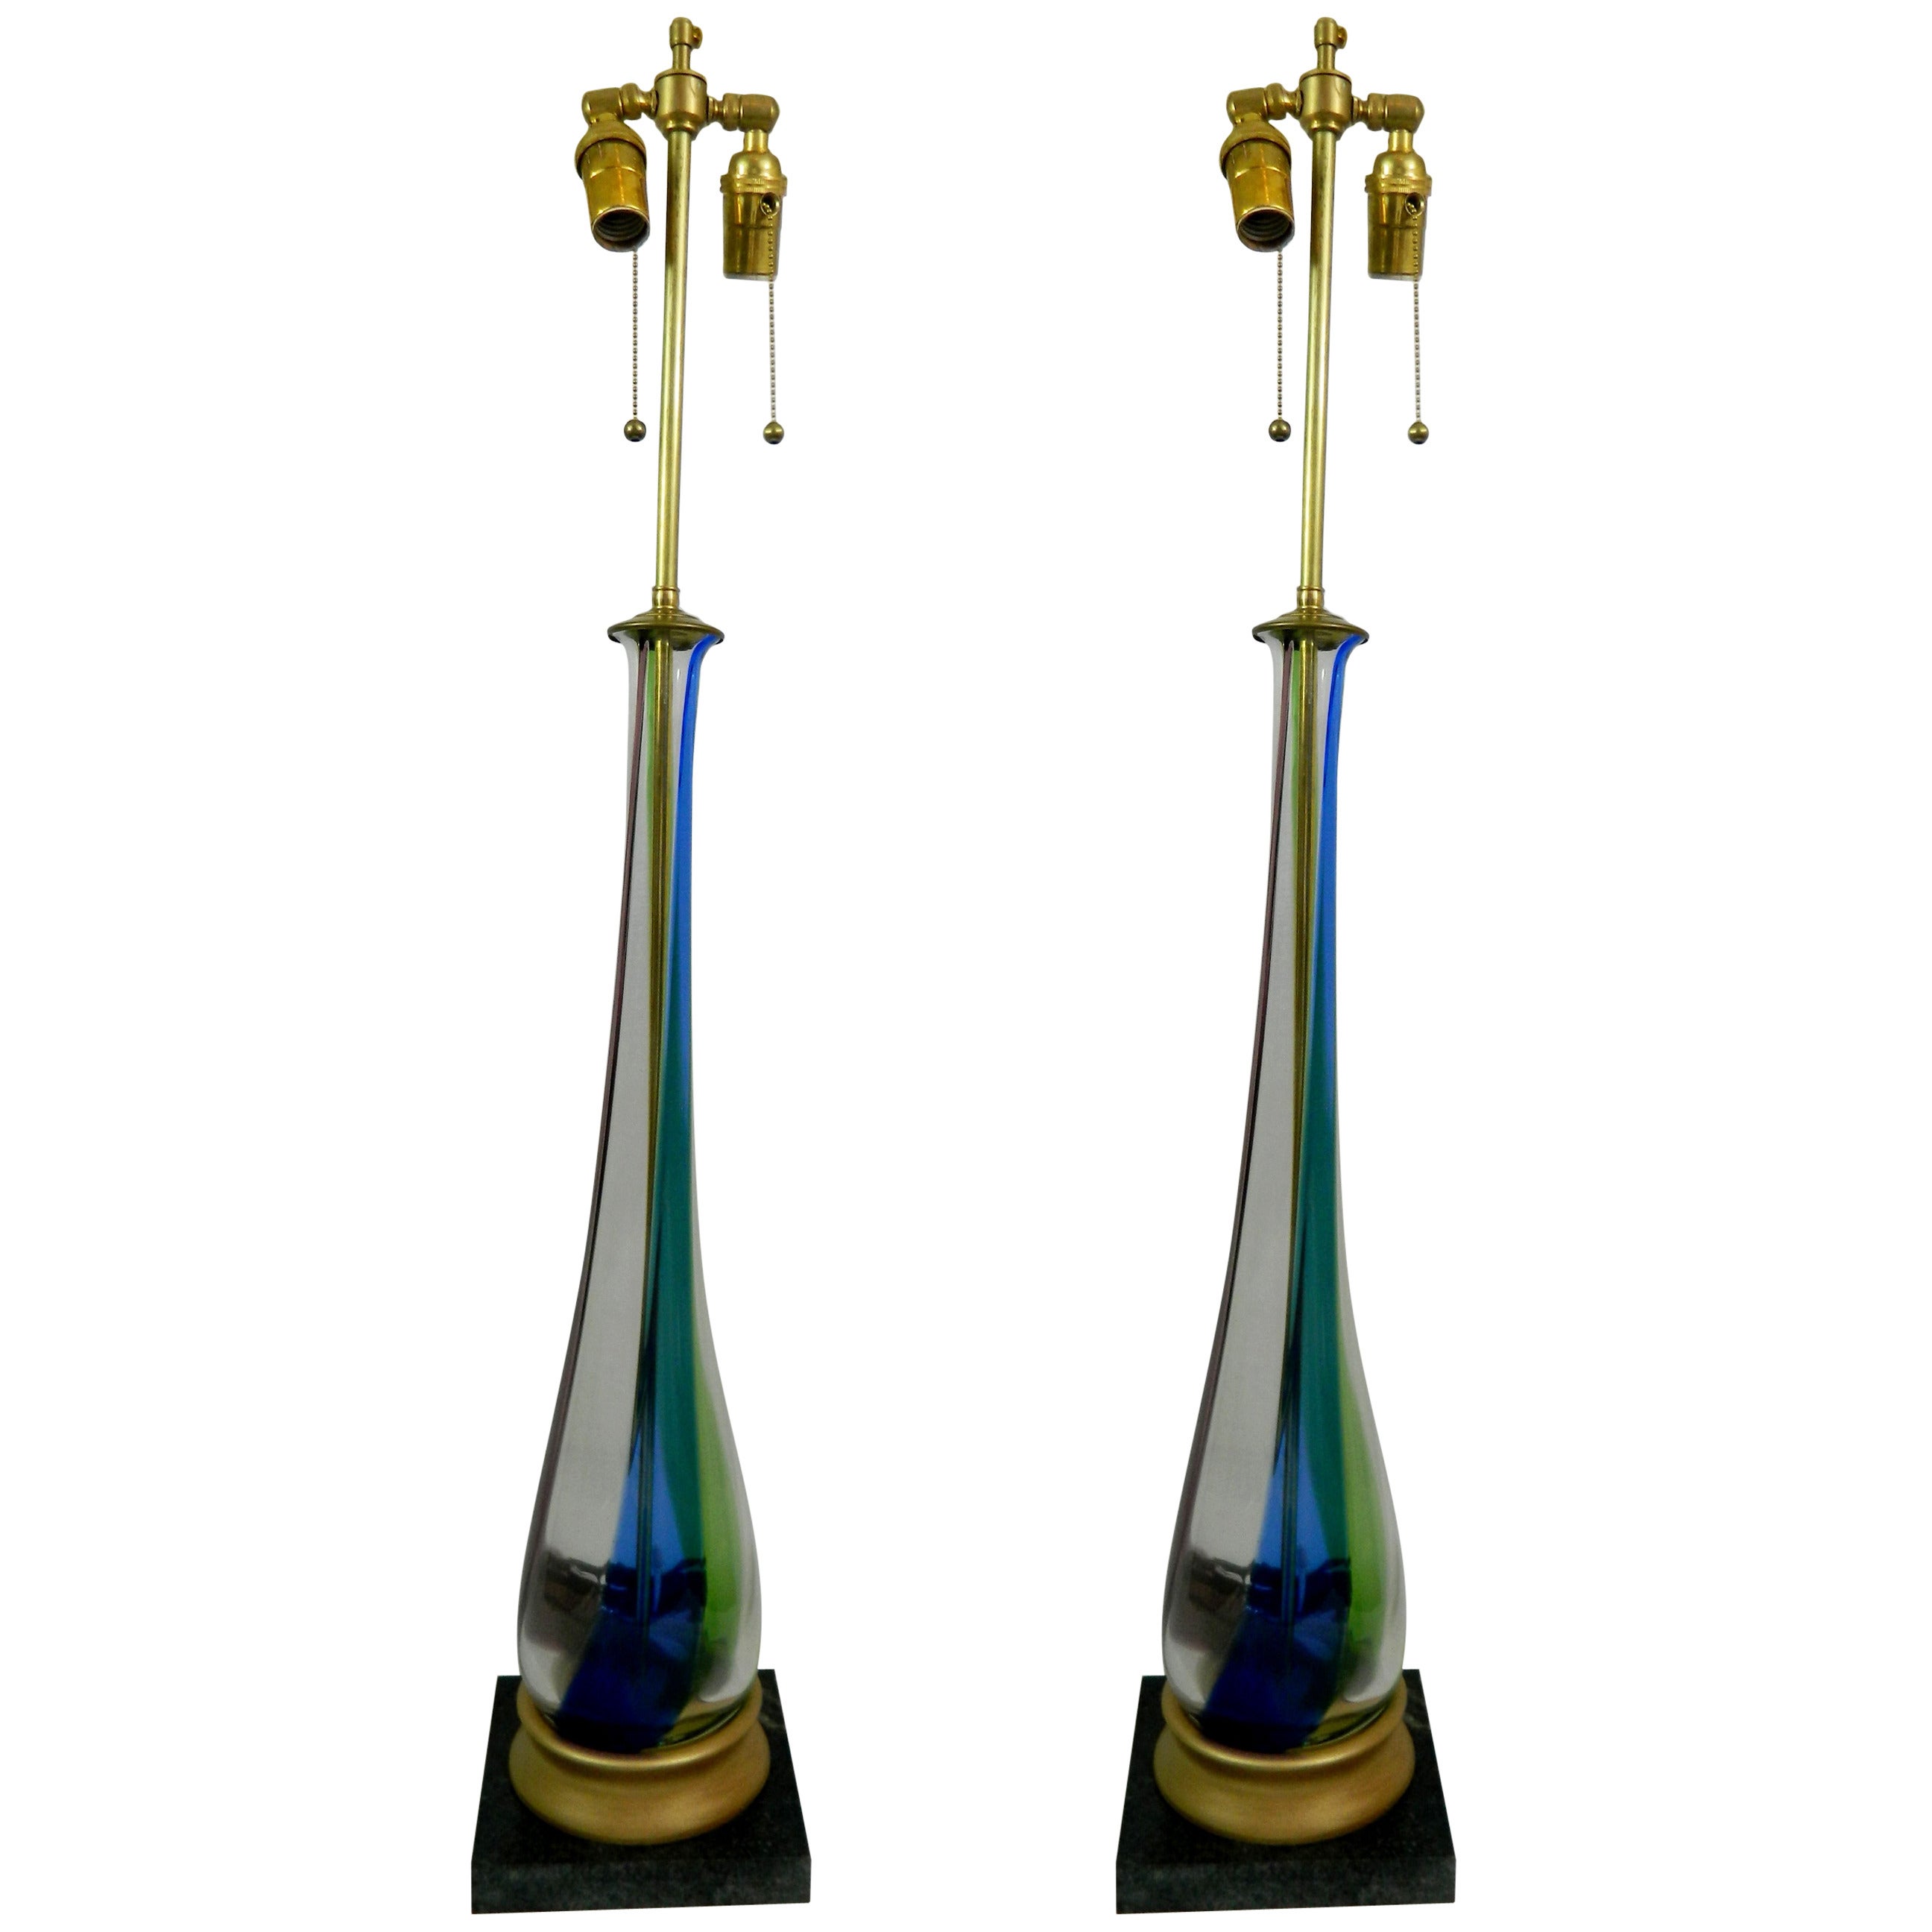 Pair of Elongated Teardrop Shaped Fluted Murano Glass Lamps, Circa 1950s